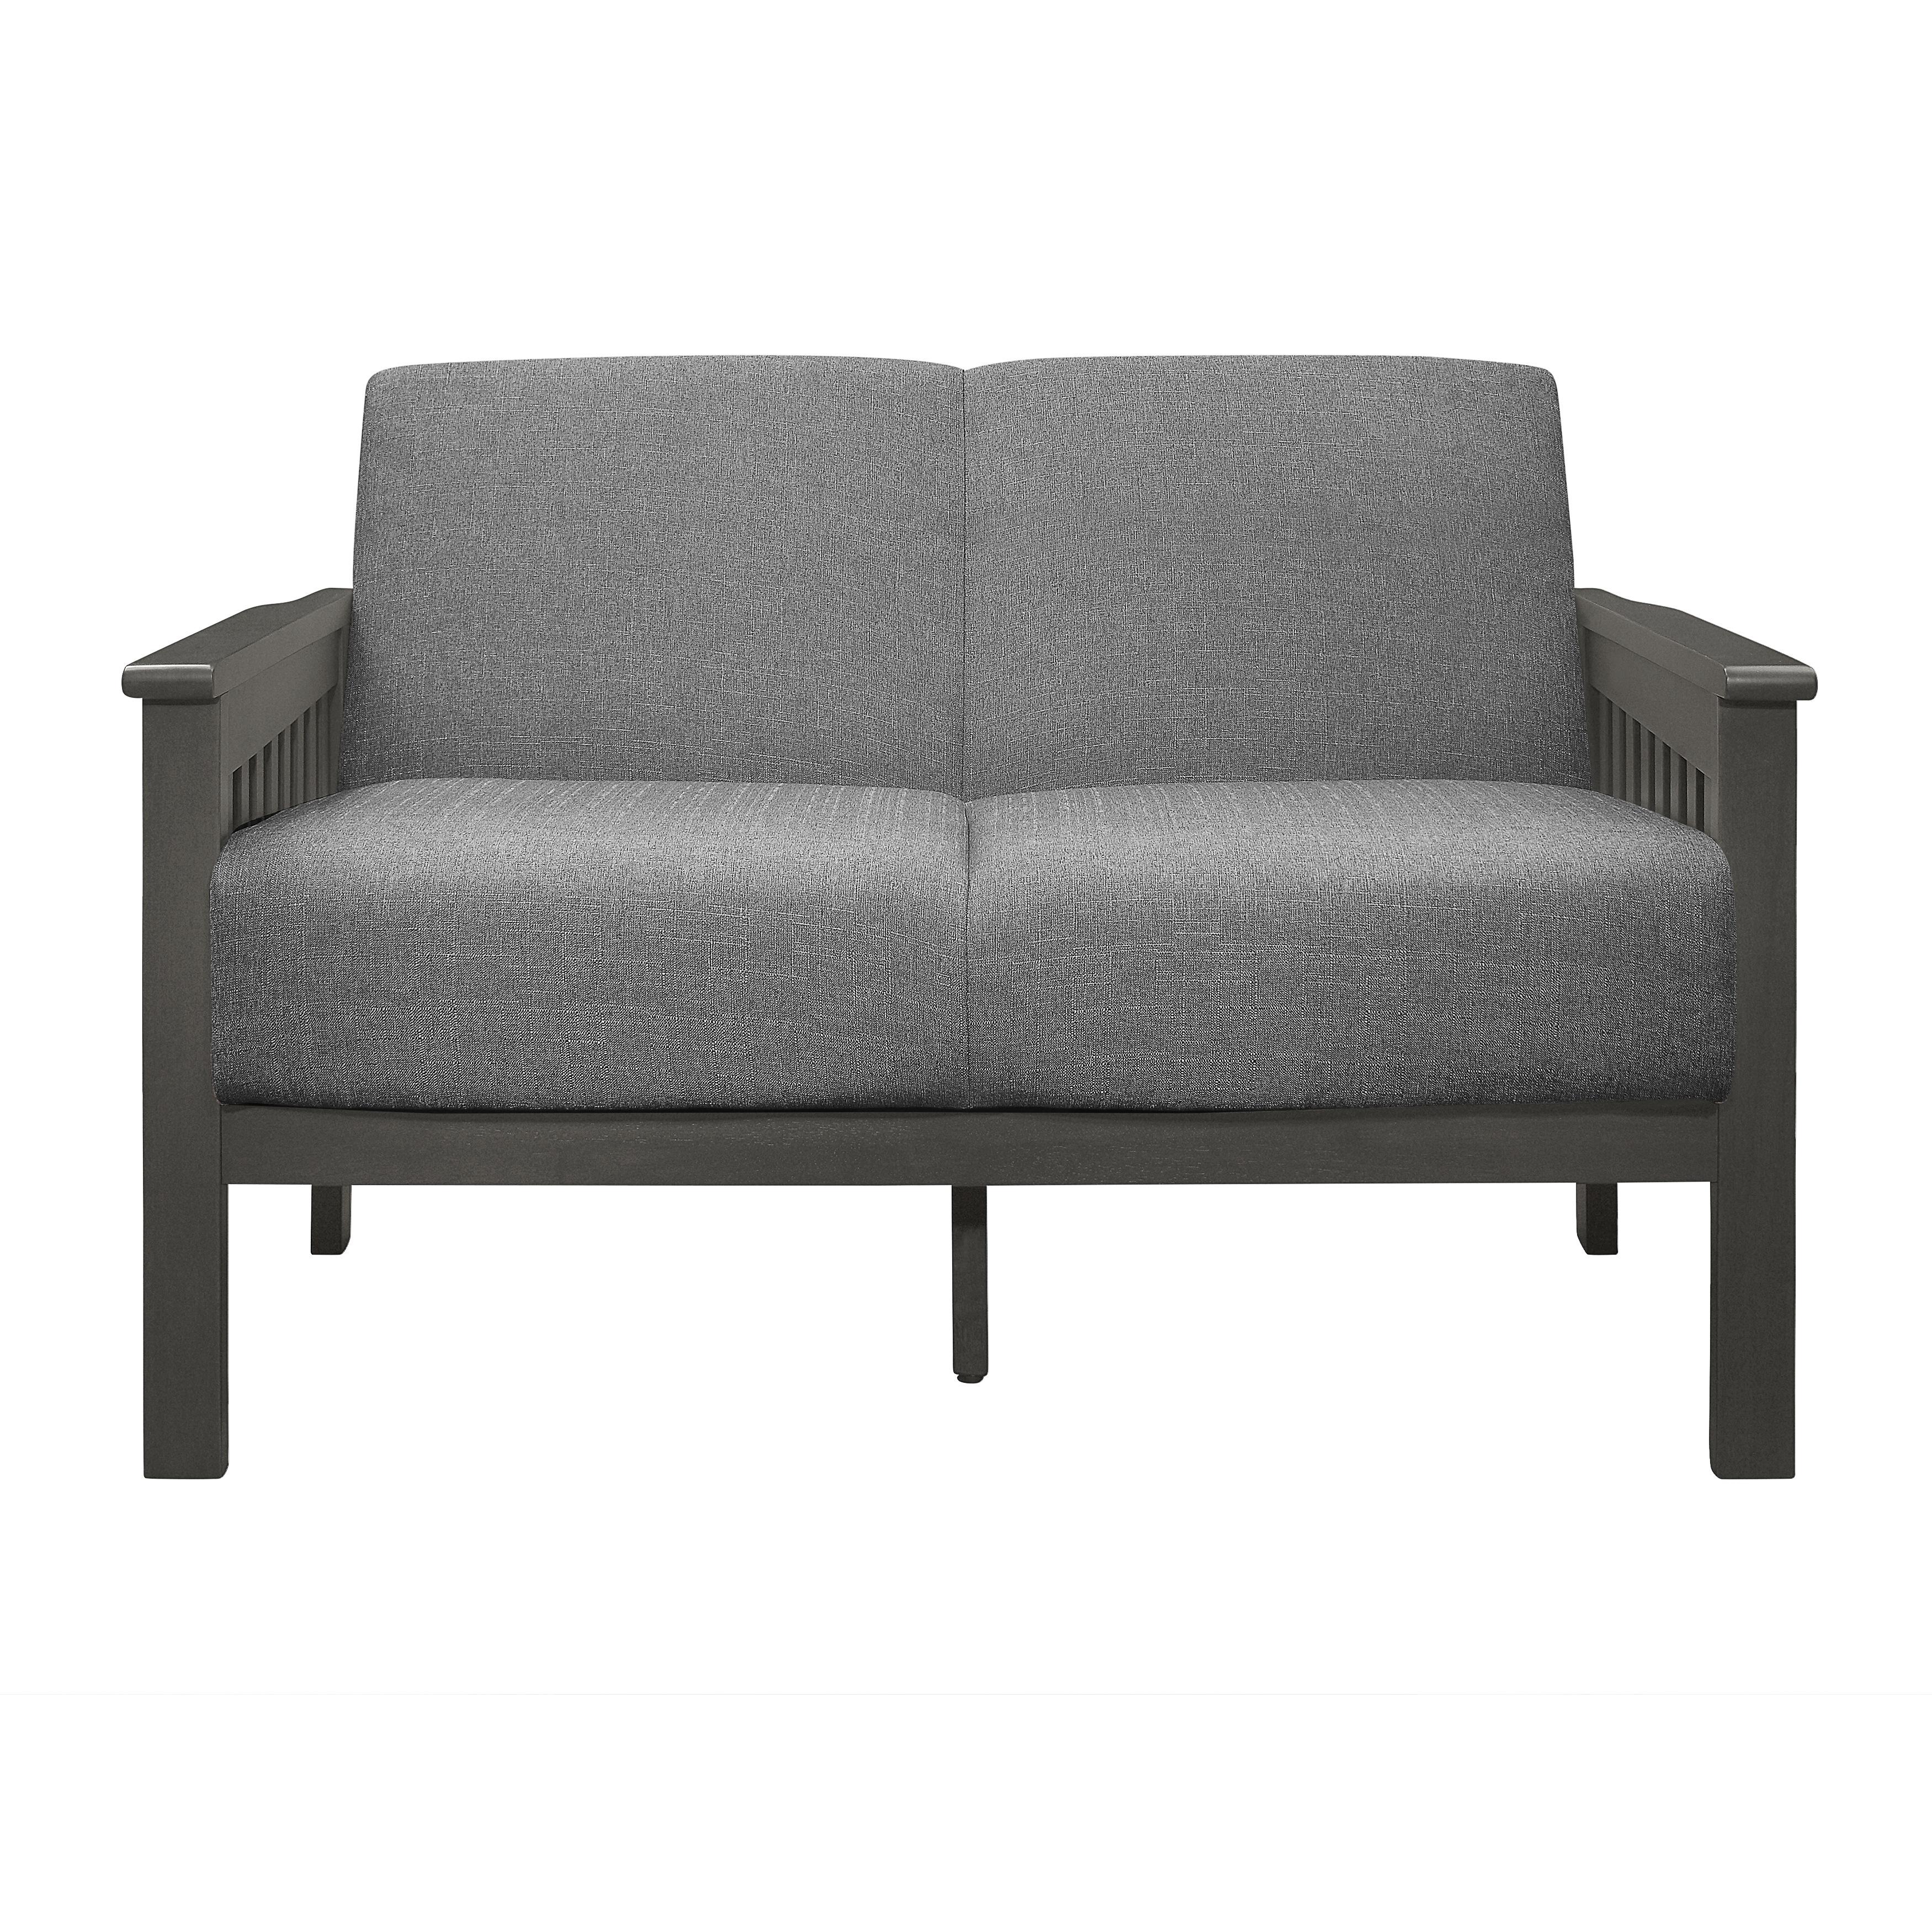 Classic Loveseat 1104GY-2 Lewiston 1104GY-2 in Gray 